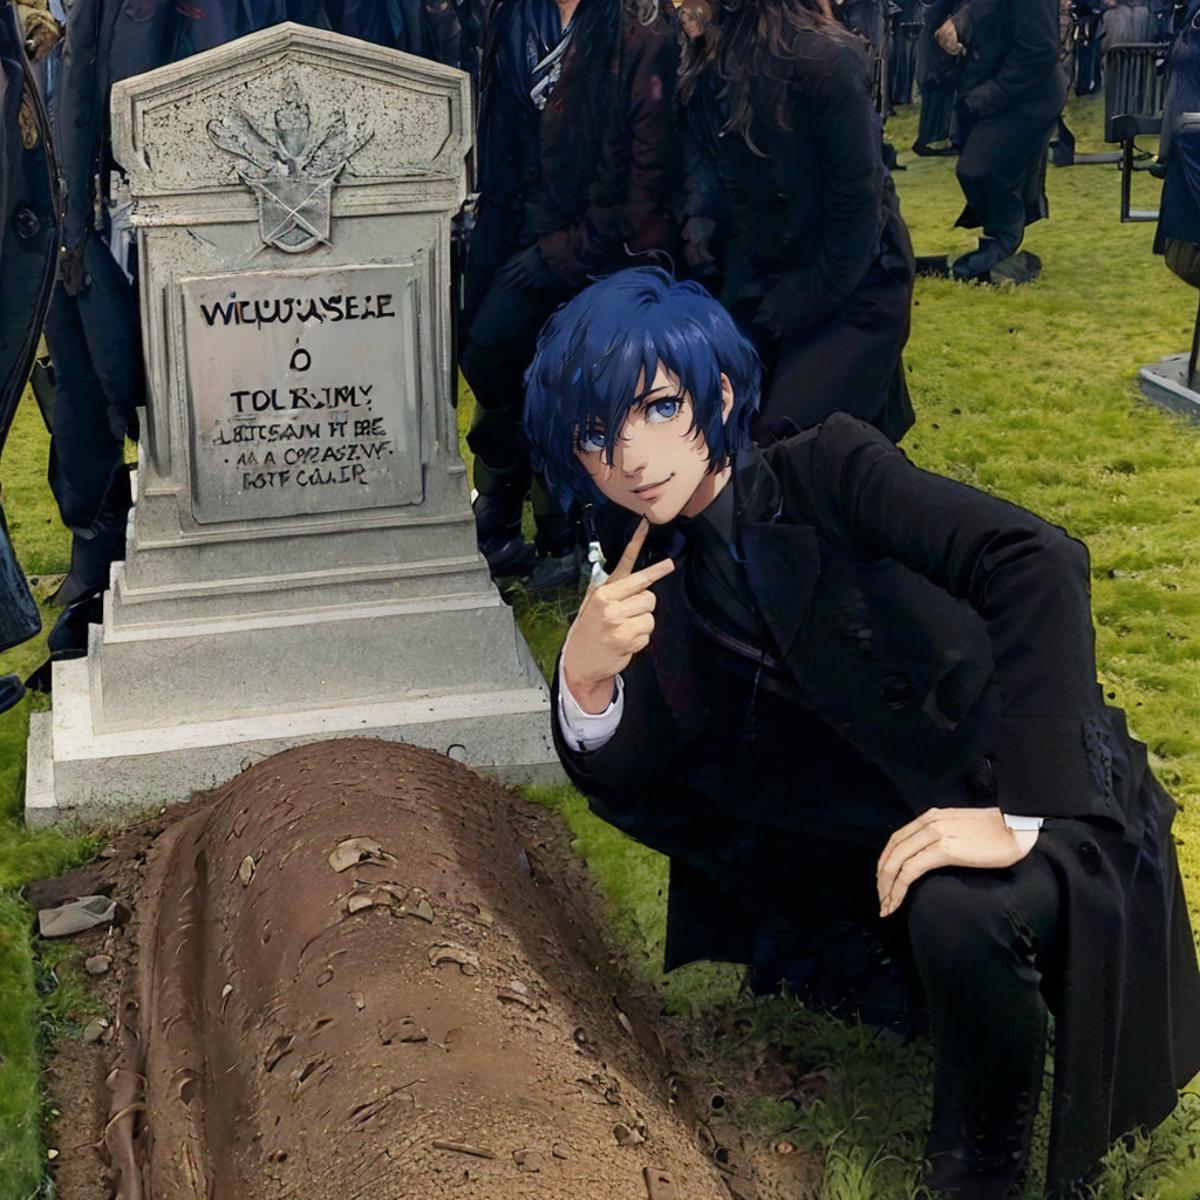 Grant Gustin Next To Oliver Queens Grave Meme | Concept LoRA image by justTNP